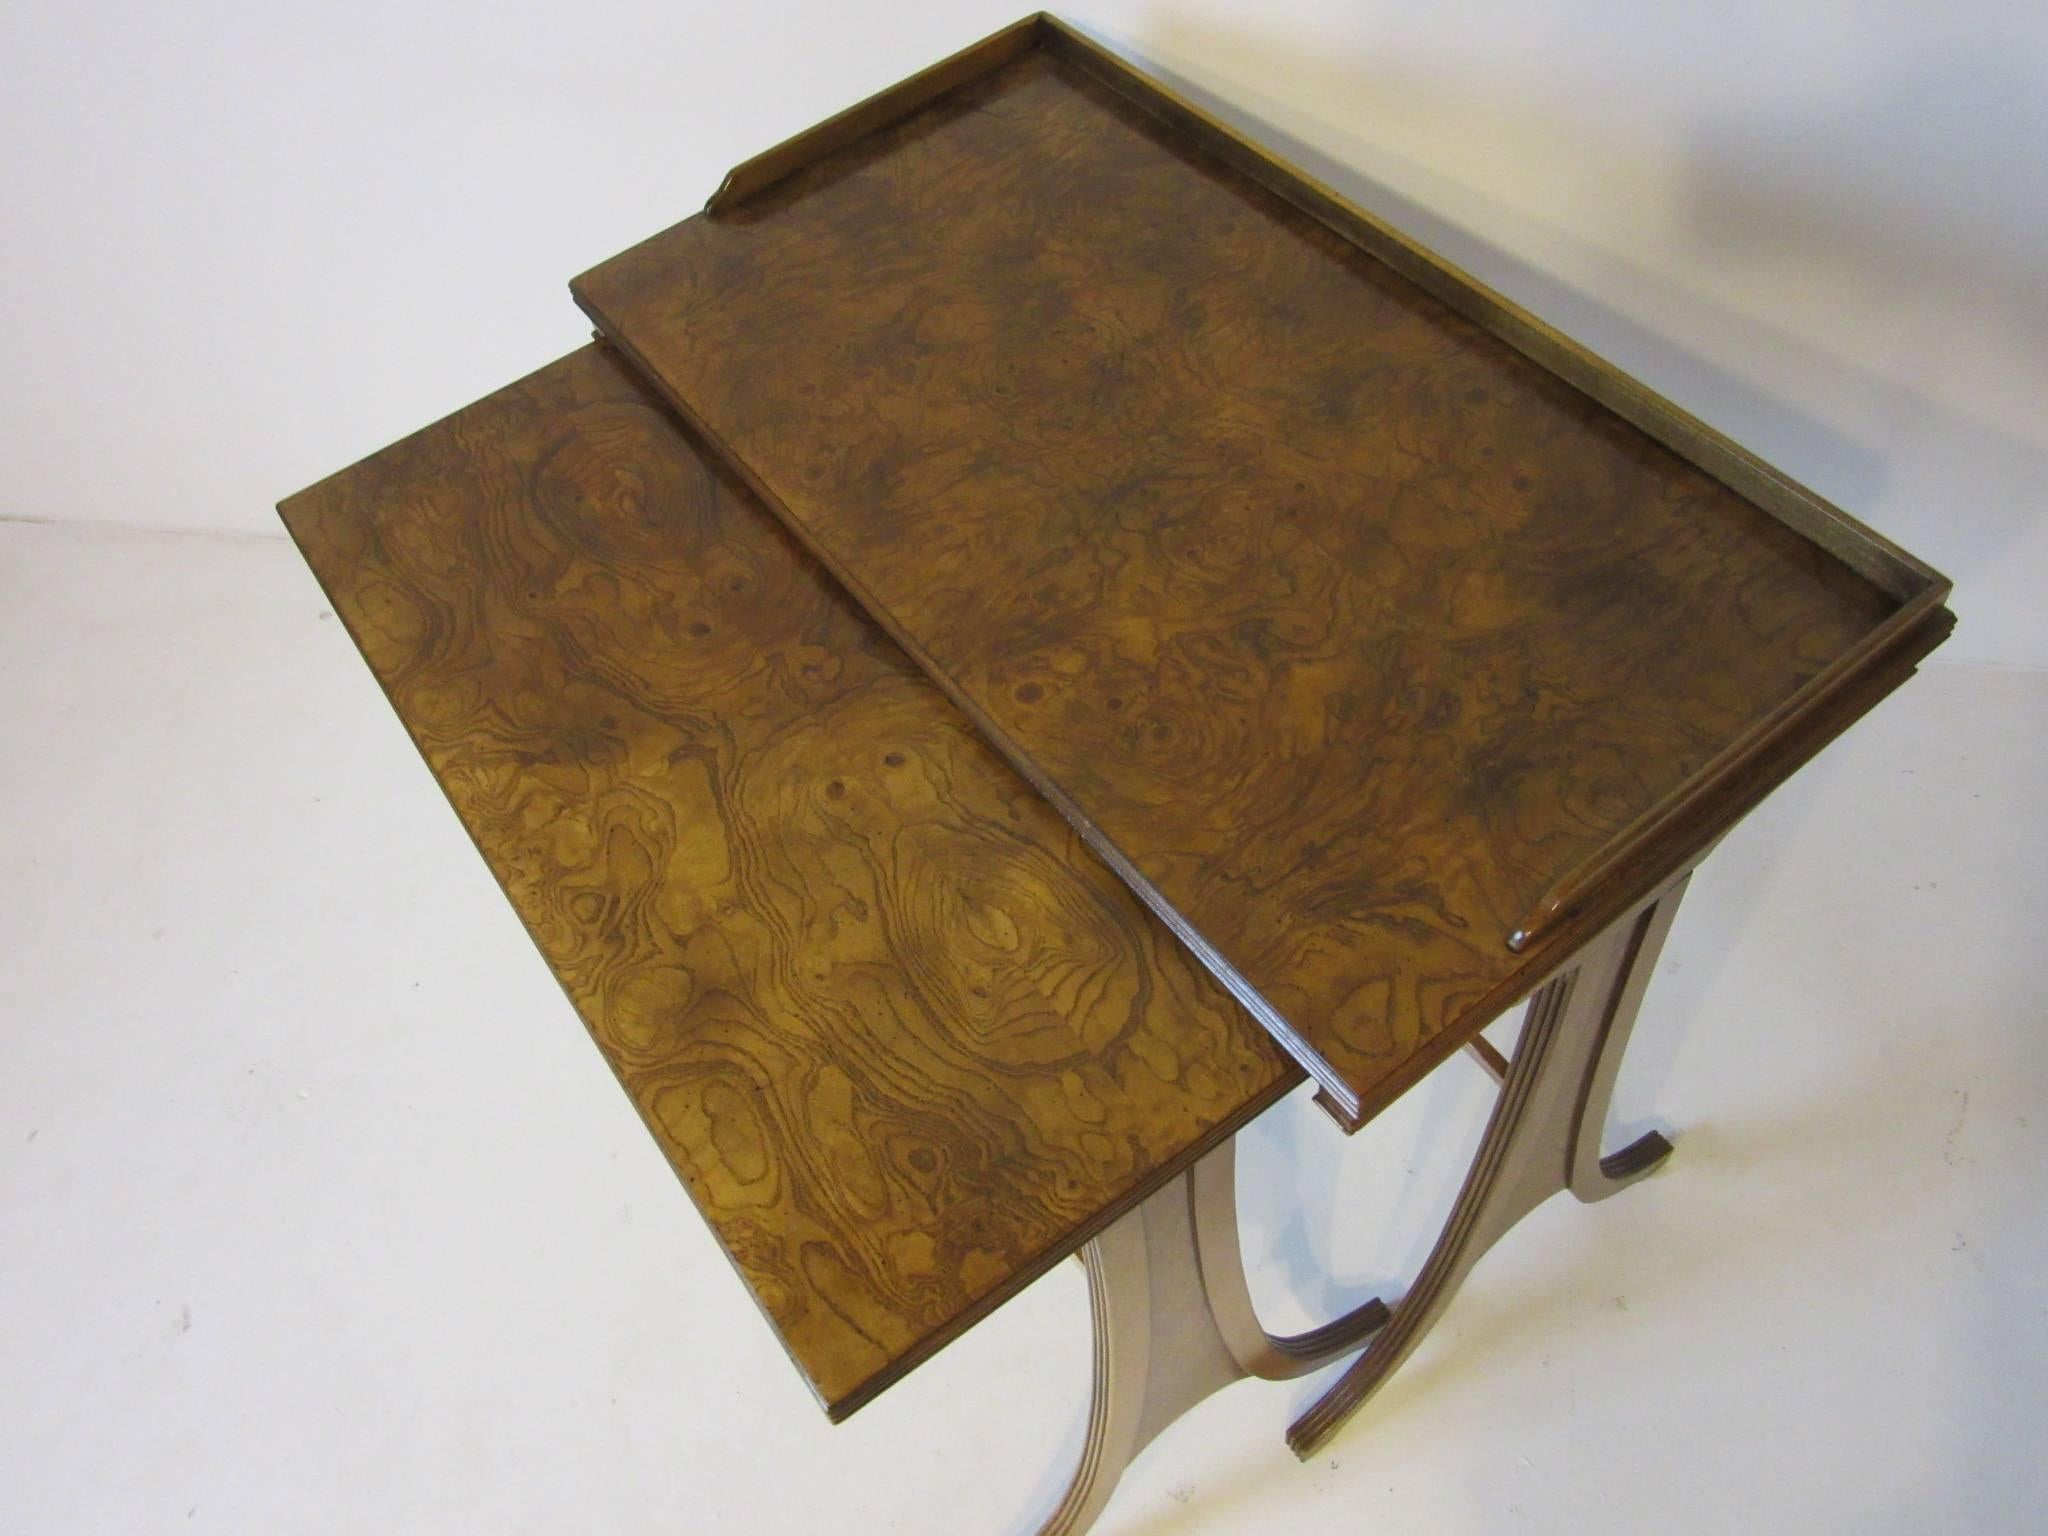 A set of two nesting burl wood side tables with formal Regency styled legs and details but with a modern twist. Crafted by the Baker Furniture company and still retaining the metal manufactures tag to the bottom. The inner table measurements are